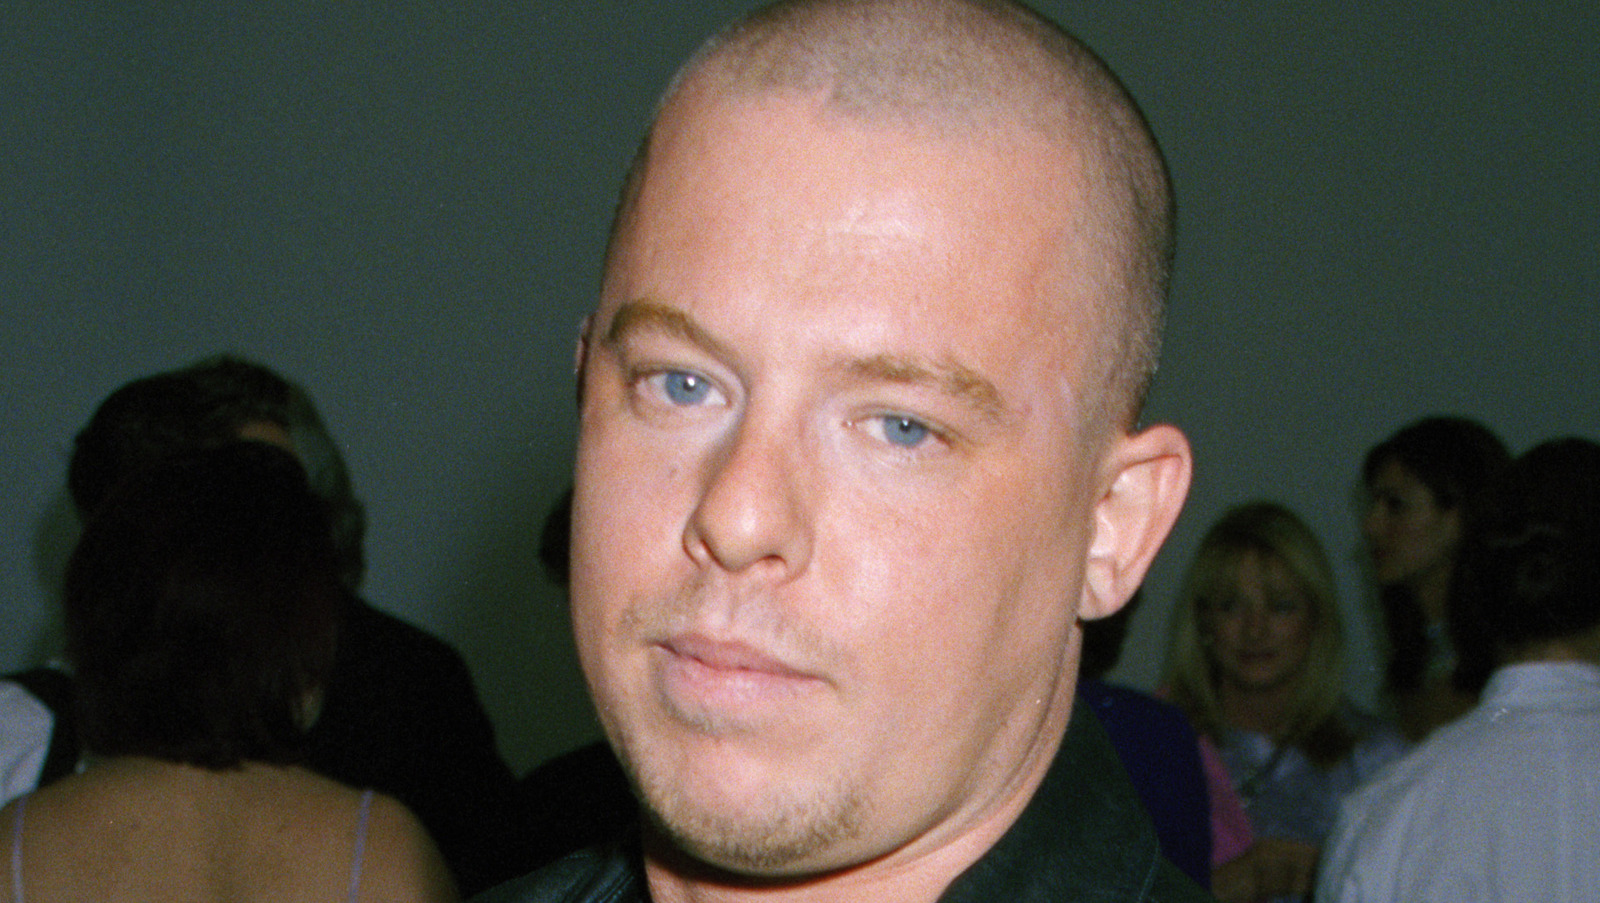 Alexander McQueen: The designer who startled us into a new